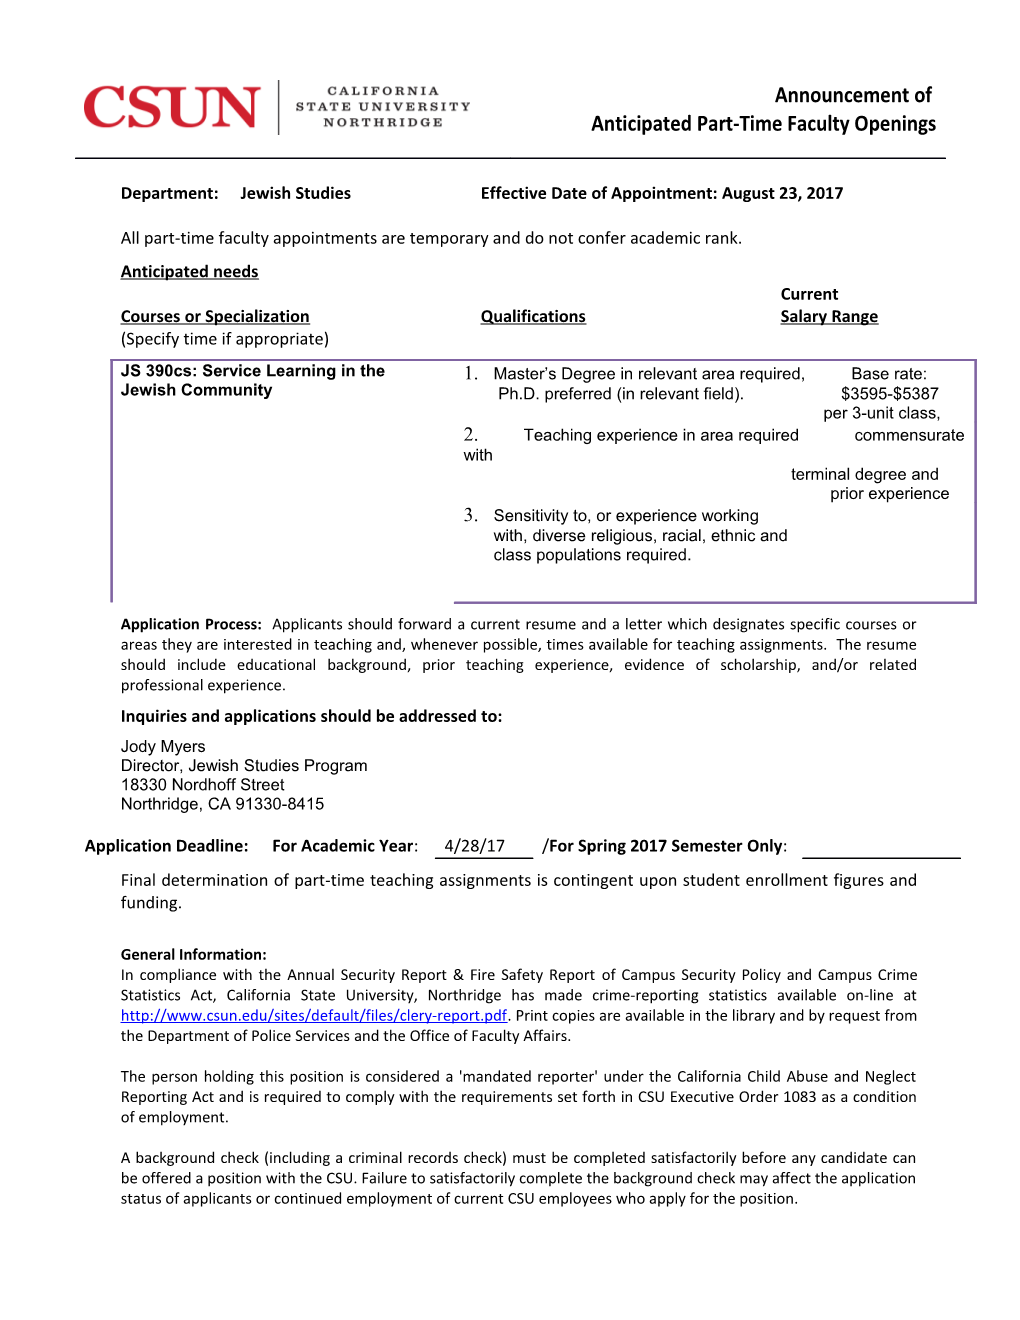 Department:Jewish Studieseffective Date of Appointment:August 23, 2017